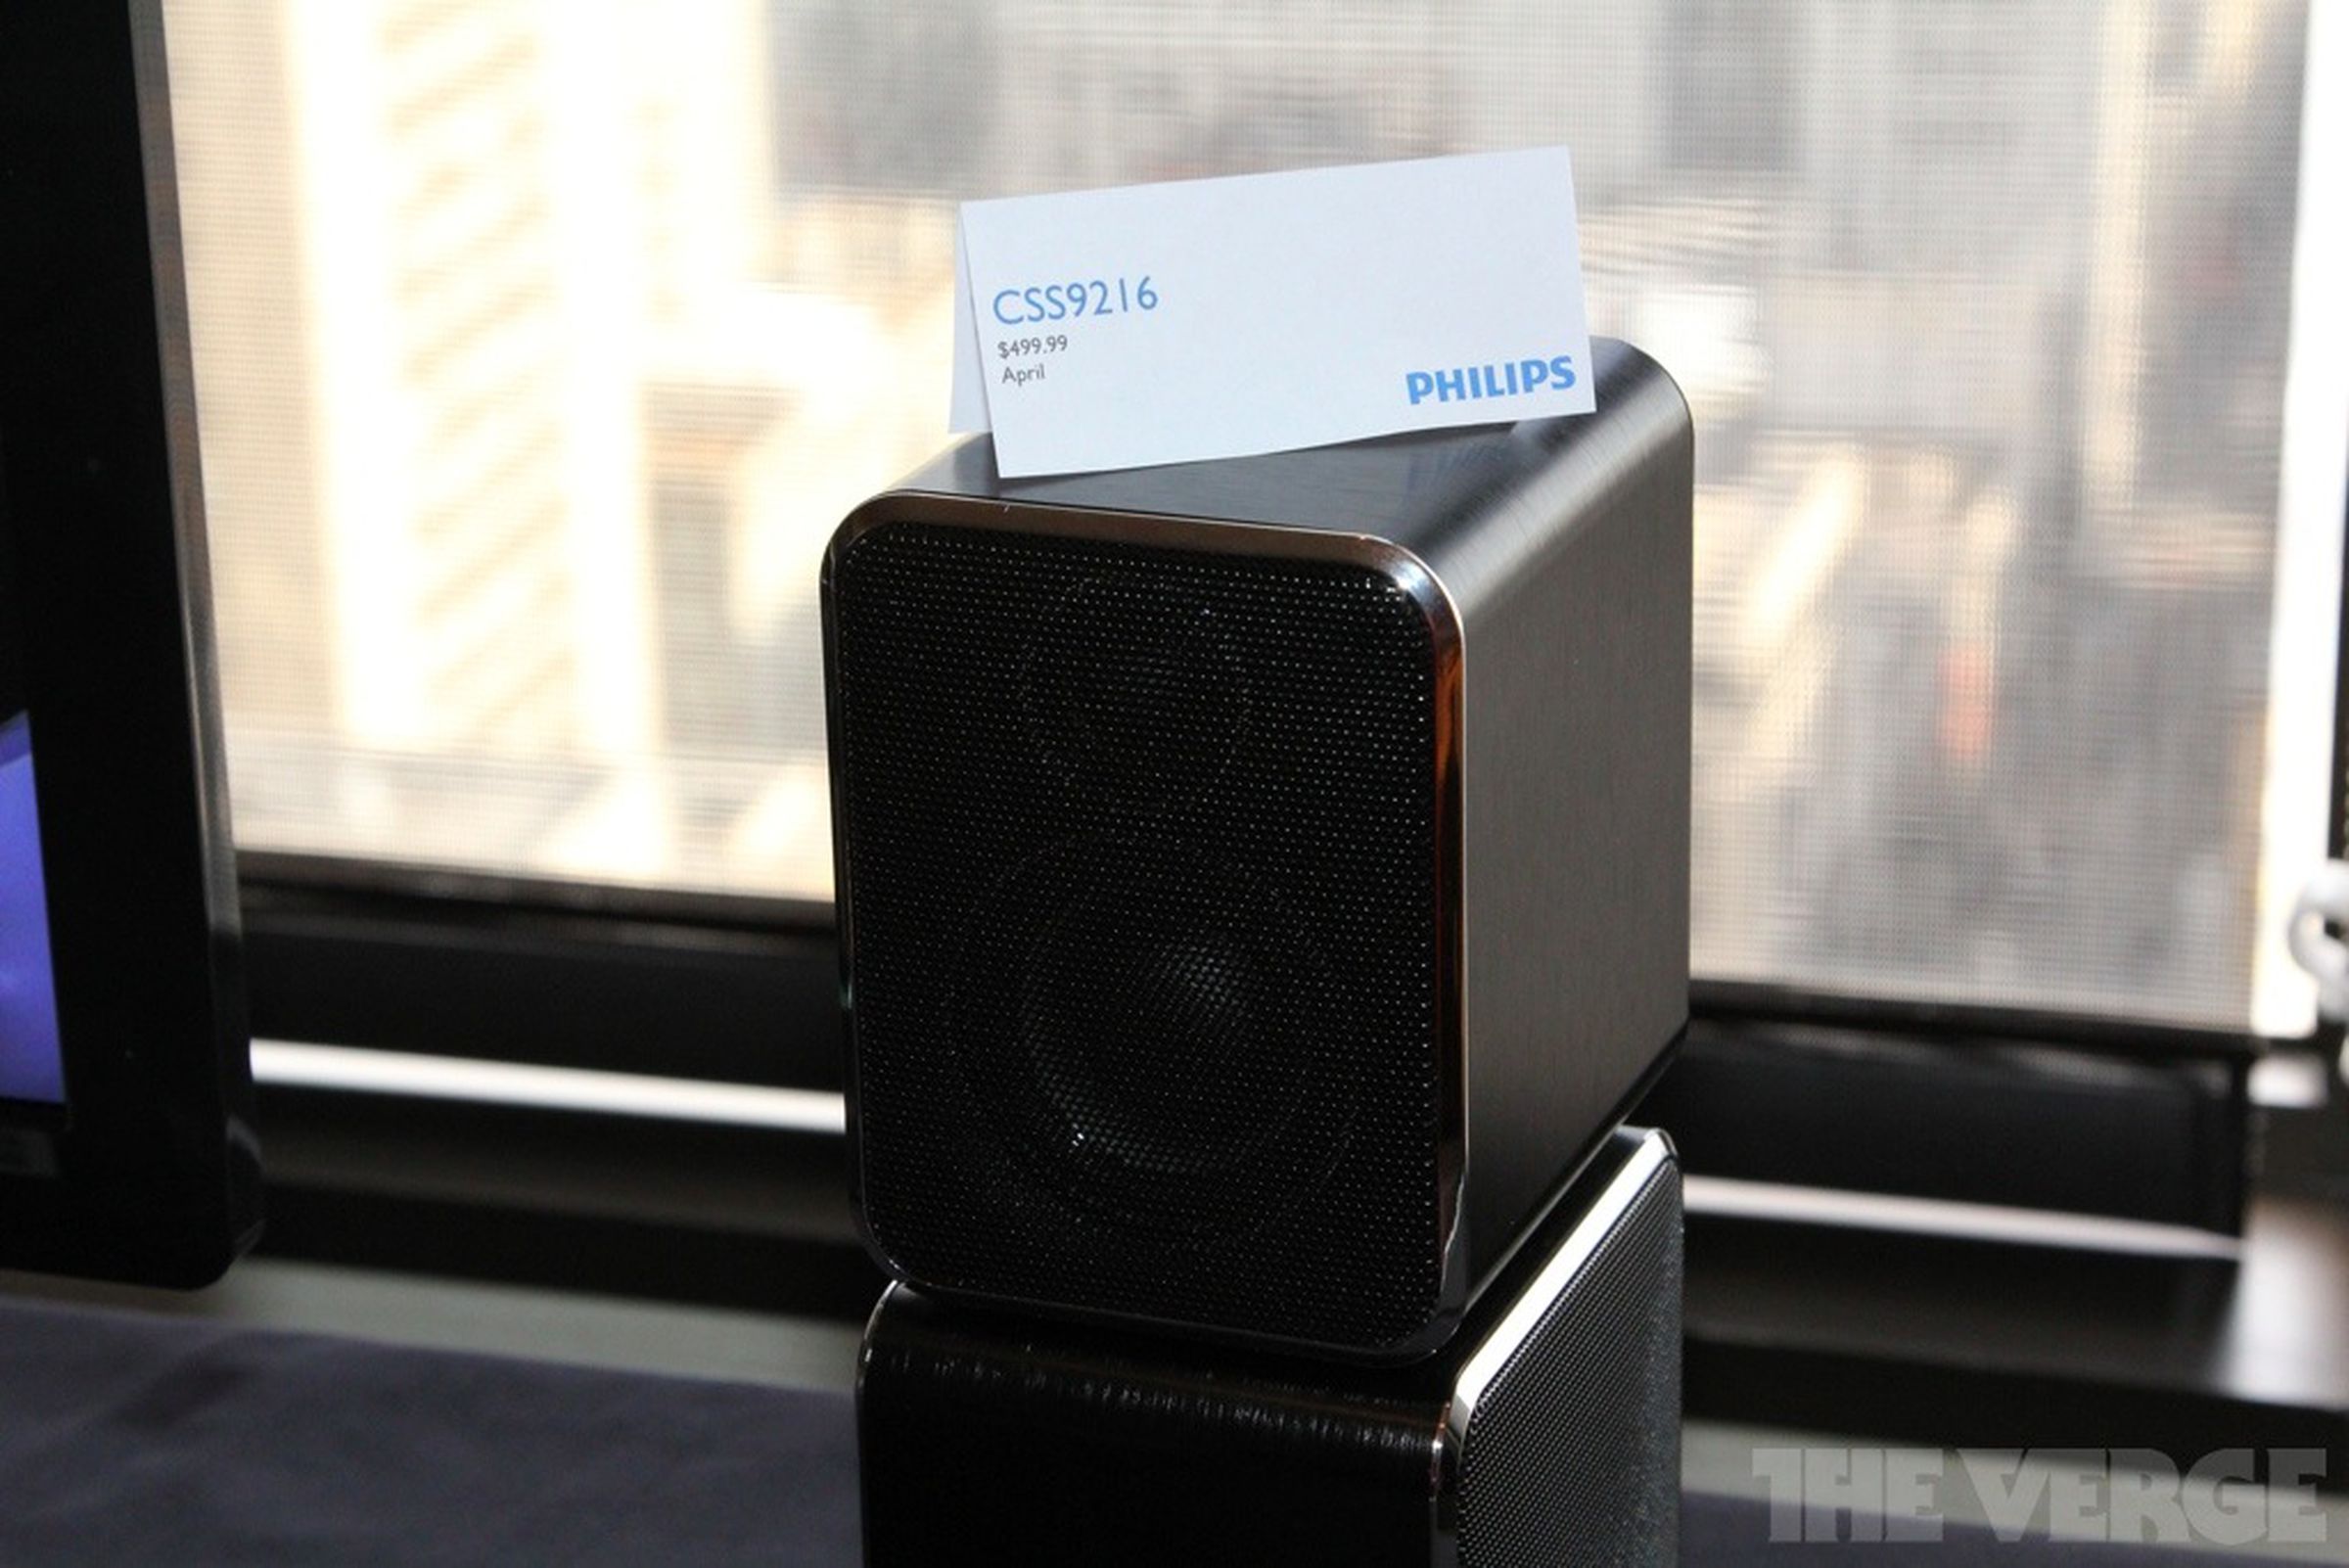 Philips SoundHub and Android Soundbar hands-on pictures